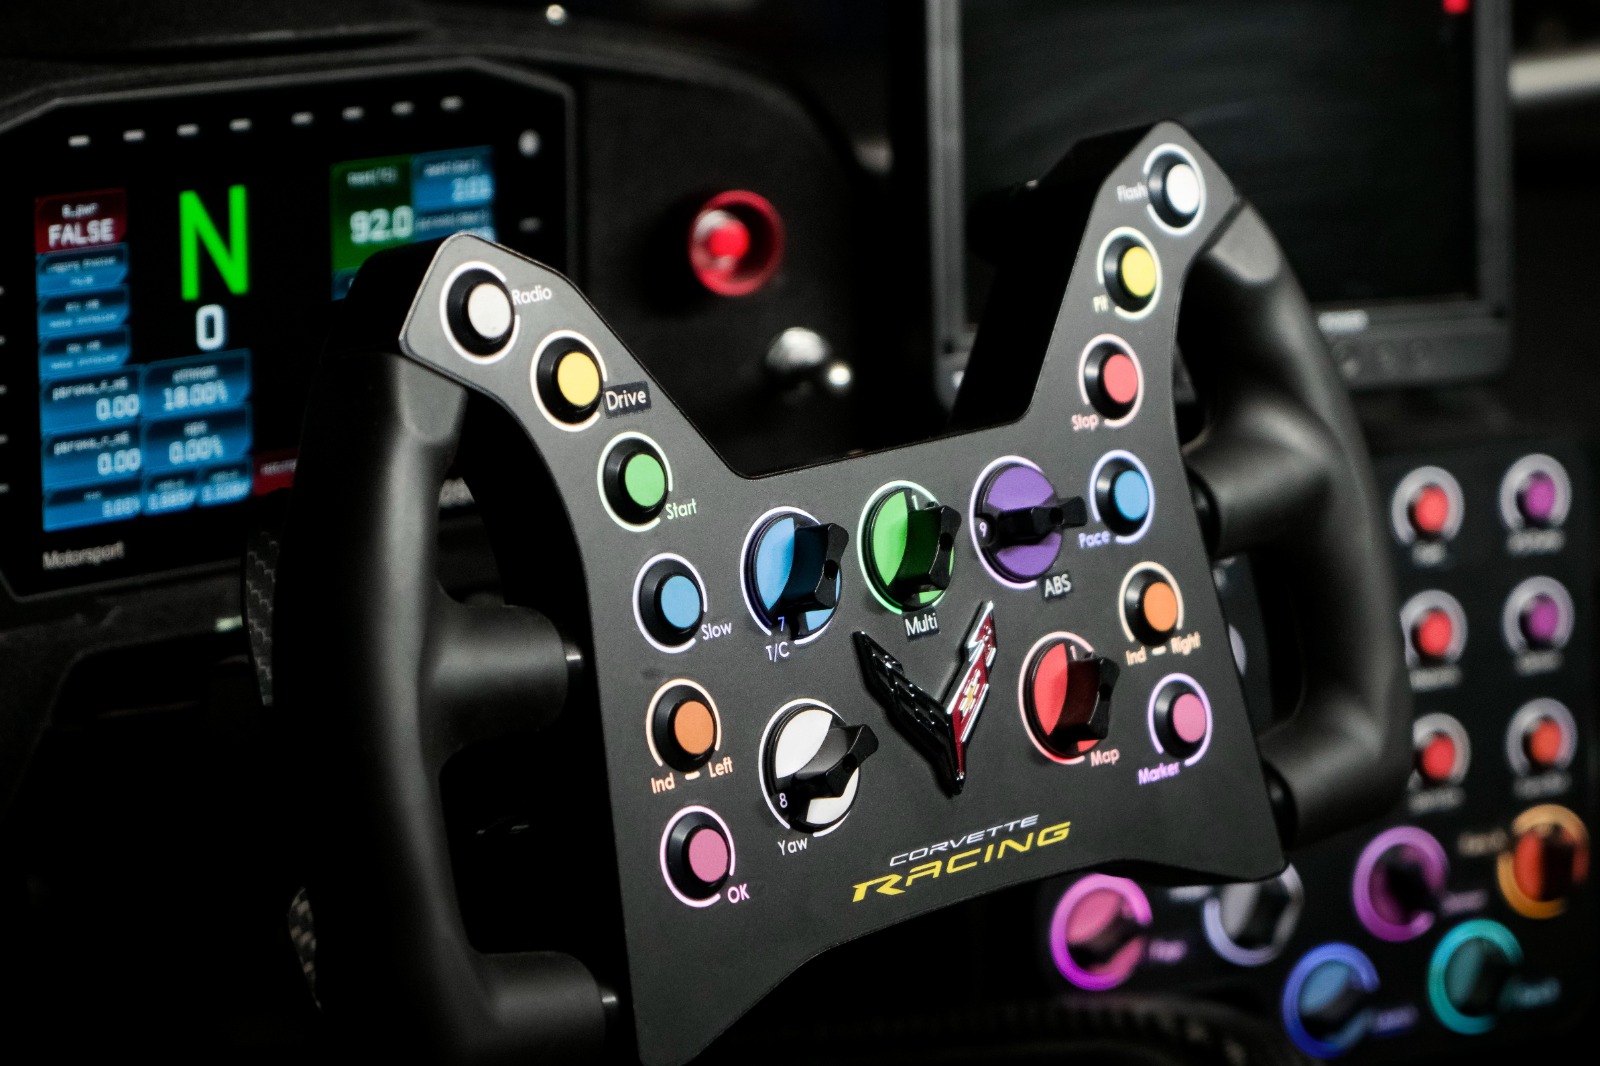 Johnson says the in-car controls have been simplified, although there are now more options to select from